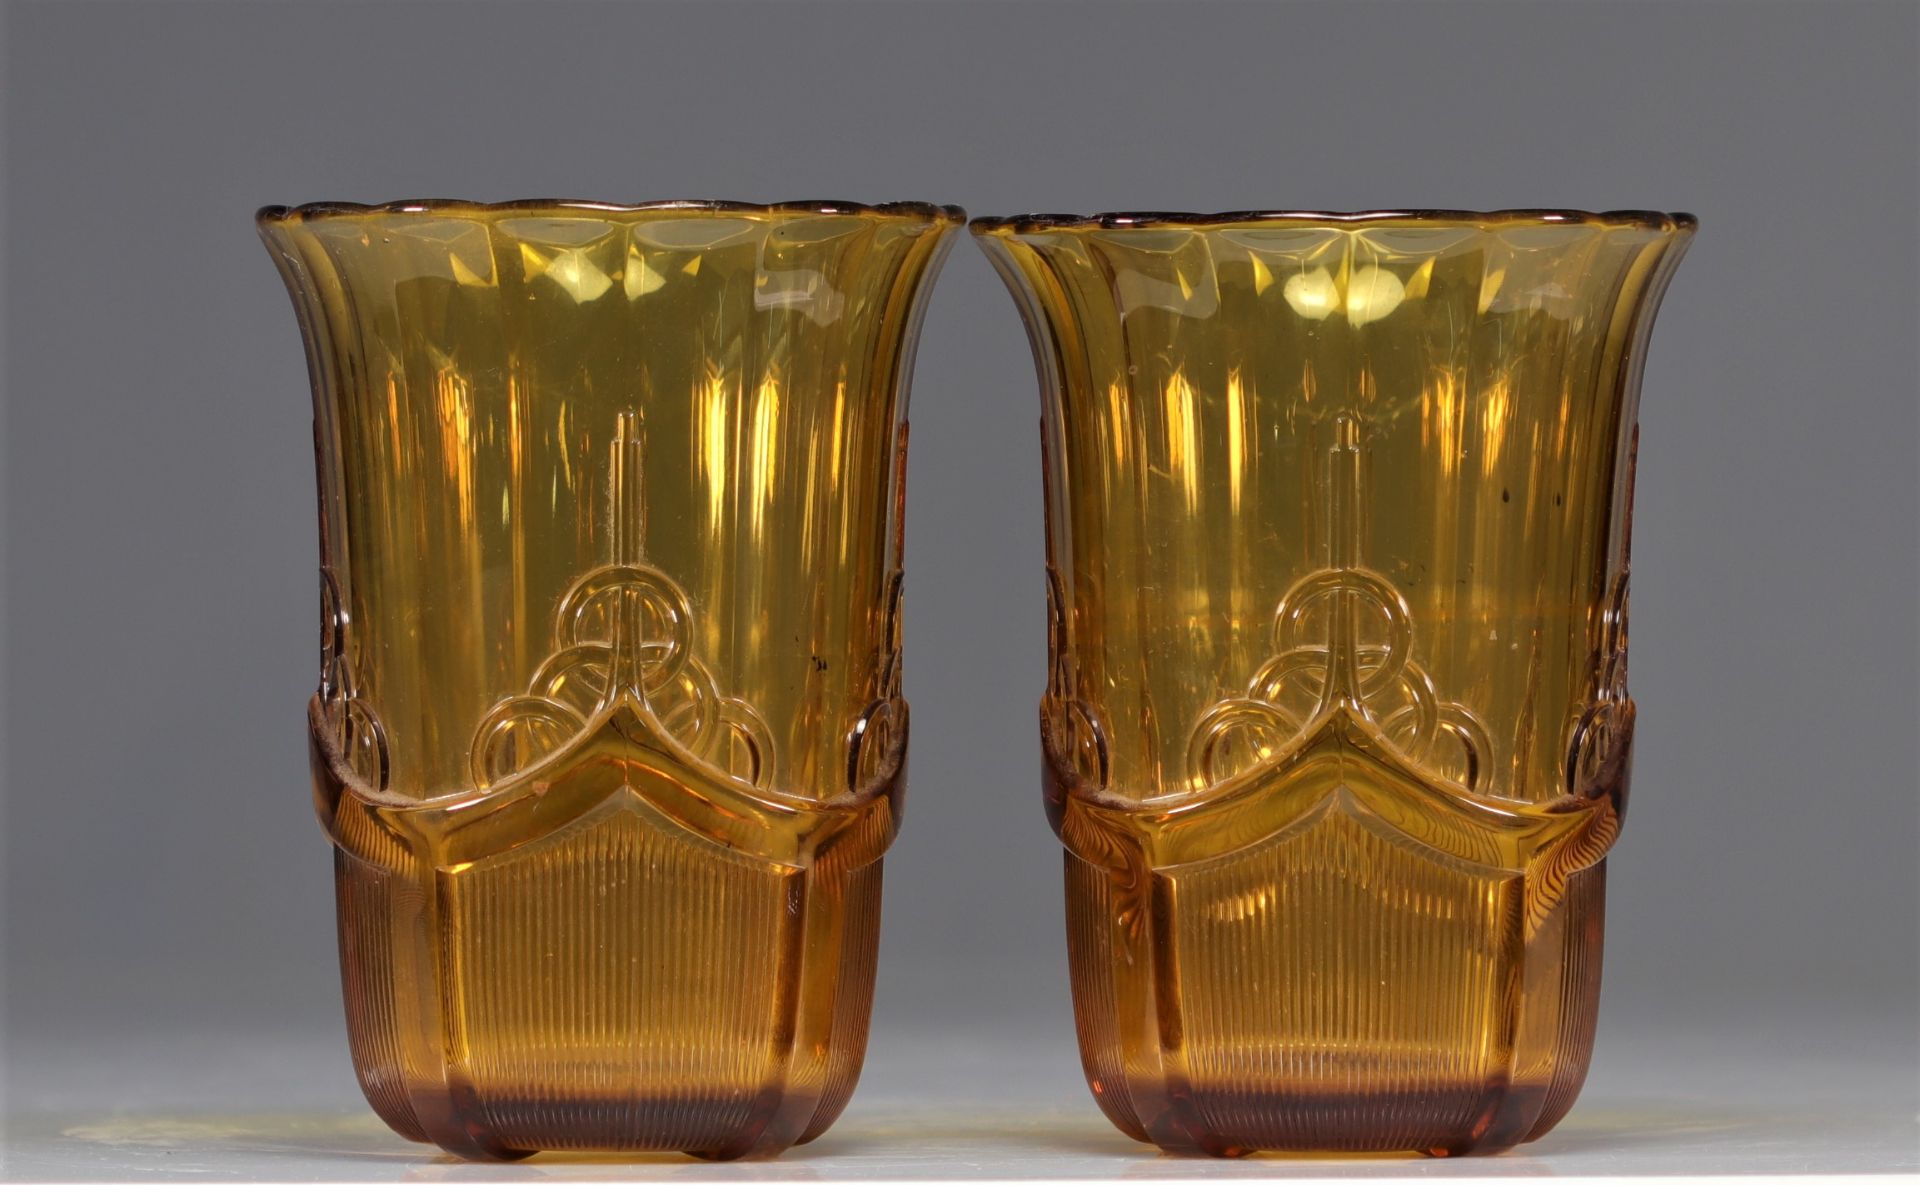 (2) Pair of Luxval Olympique glass vases